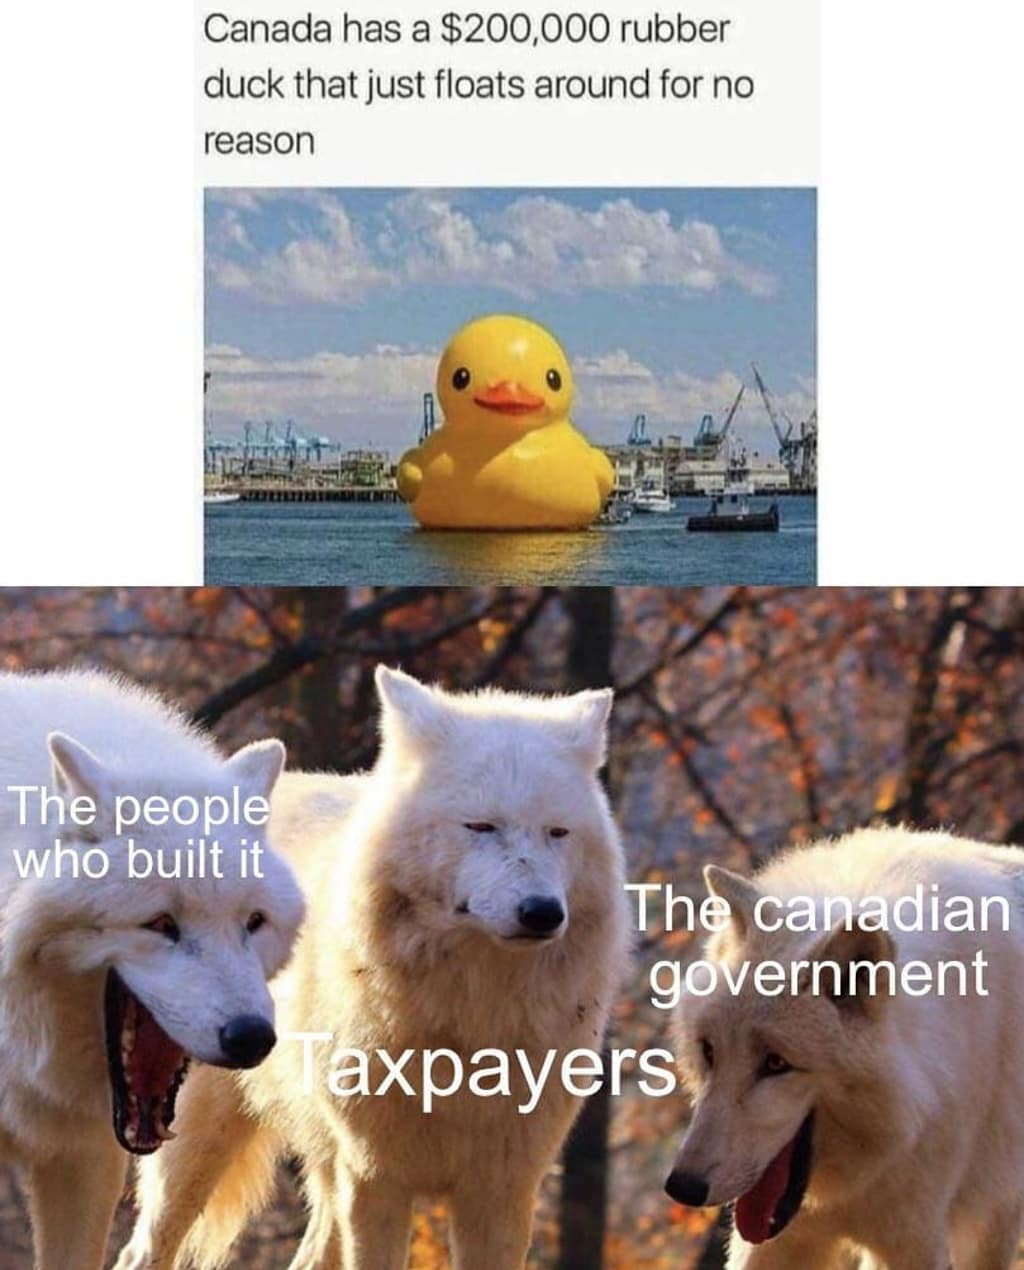 imgflip laughing wolf meme template - Canada has a $200,000 rubber duck that just floats around for no reason The people who built it The canadian government axpayers